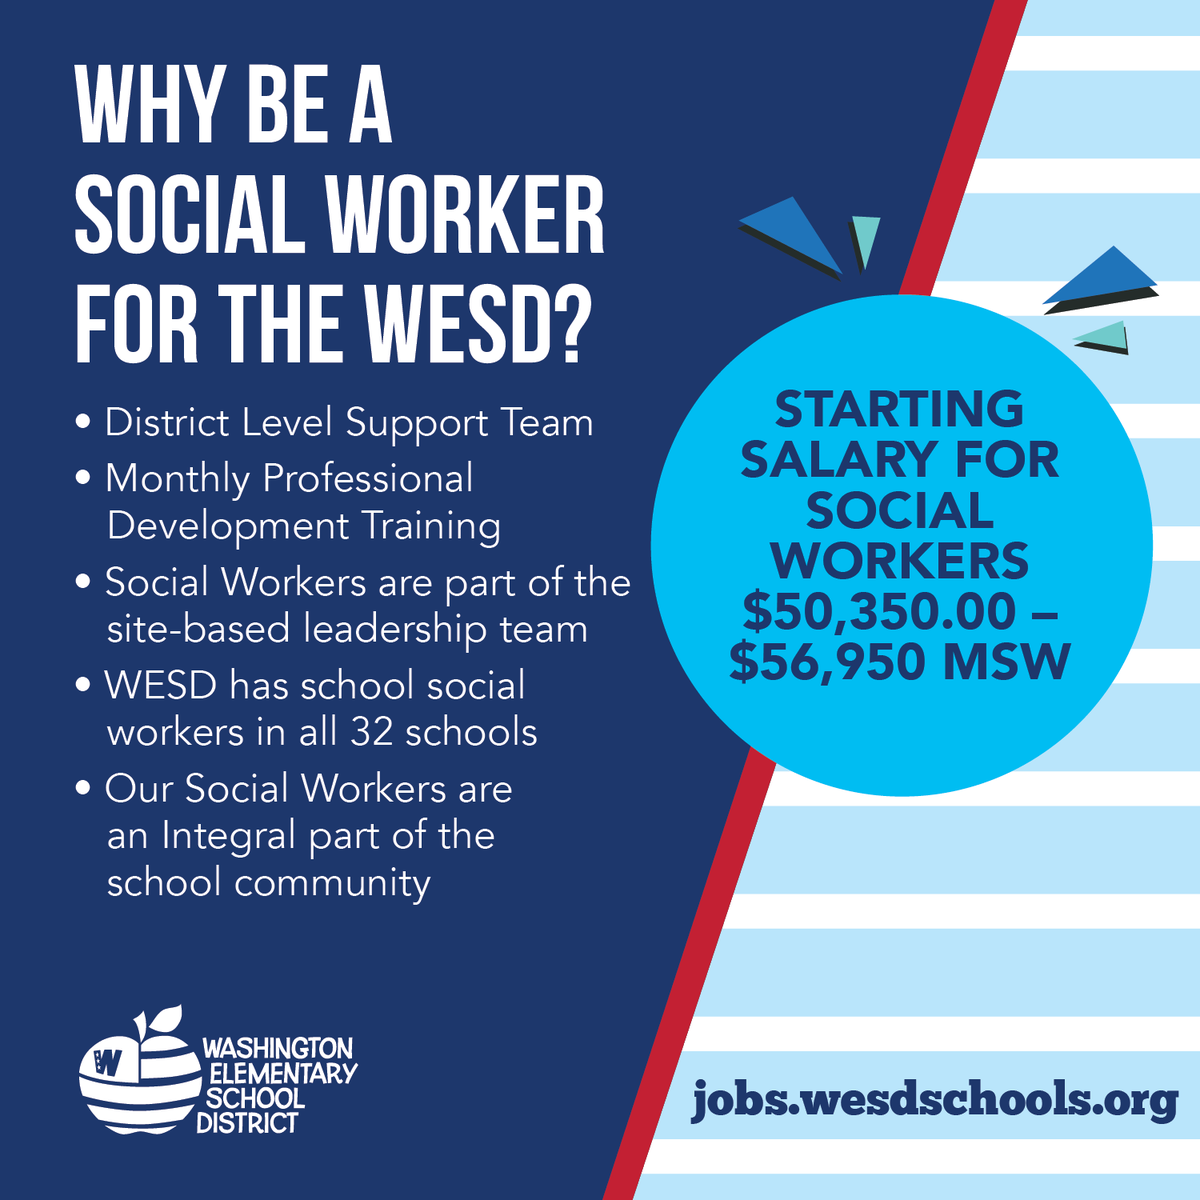 The WESD is seeking school social workers who want to make a positive, lasting impact on the wellbeing of our students and families! To apply online, please visit jobs.wesdschools.org.  To learn more, please contact Lydia Garcia at 602-347-2622. #WESDFamily